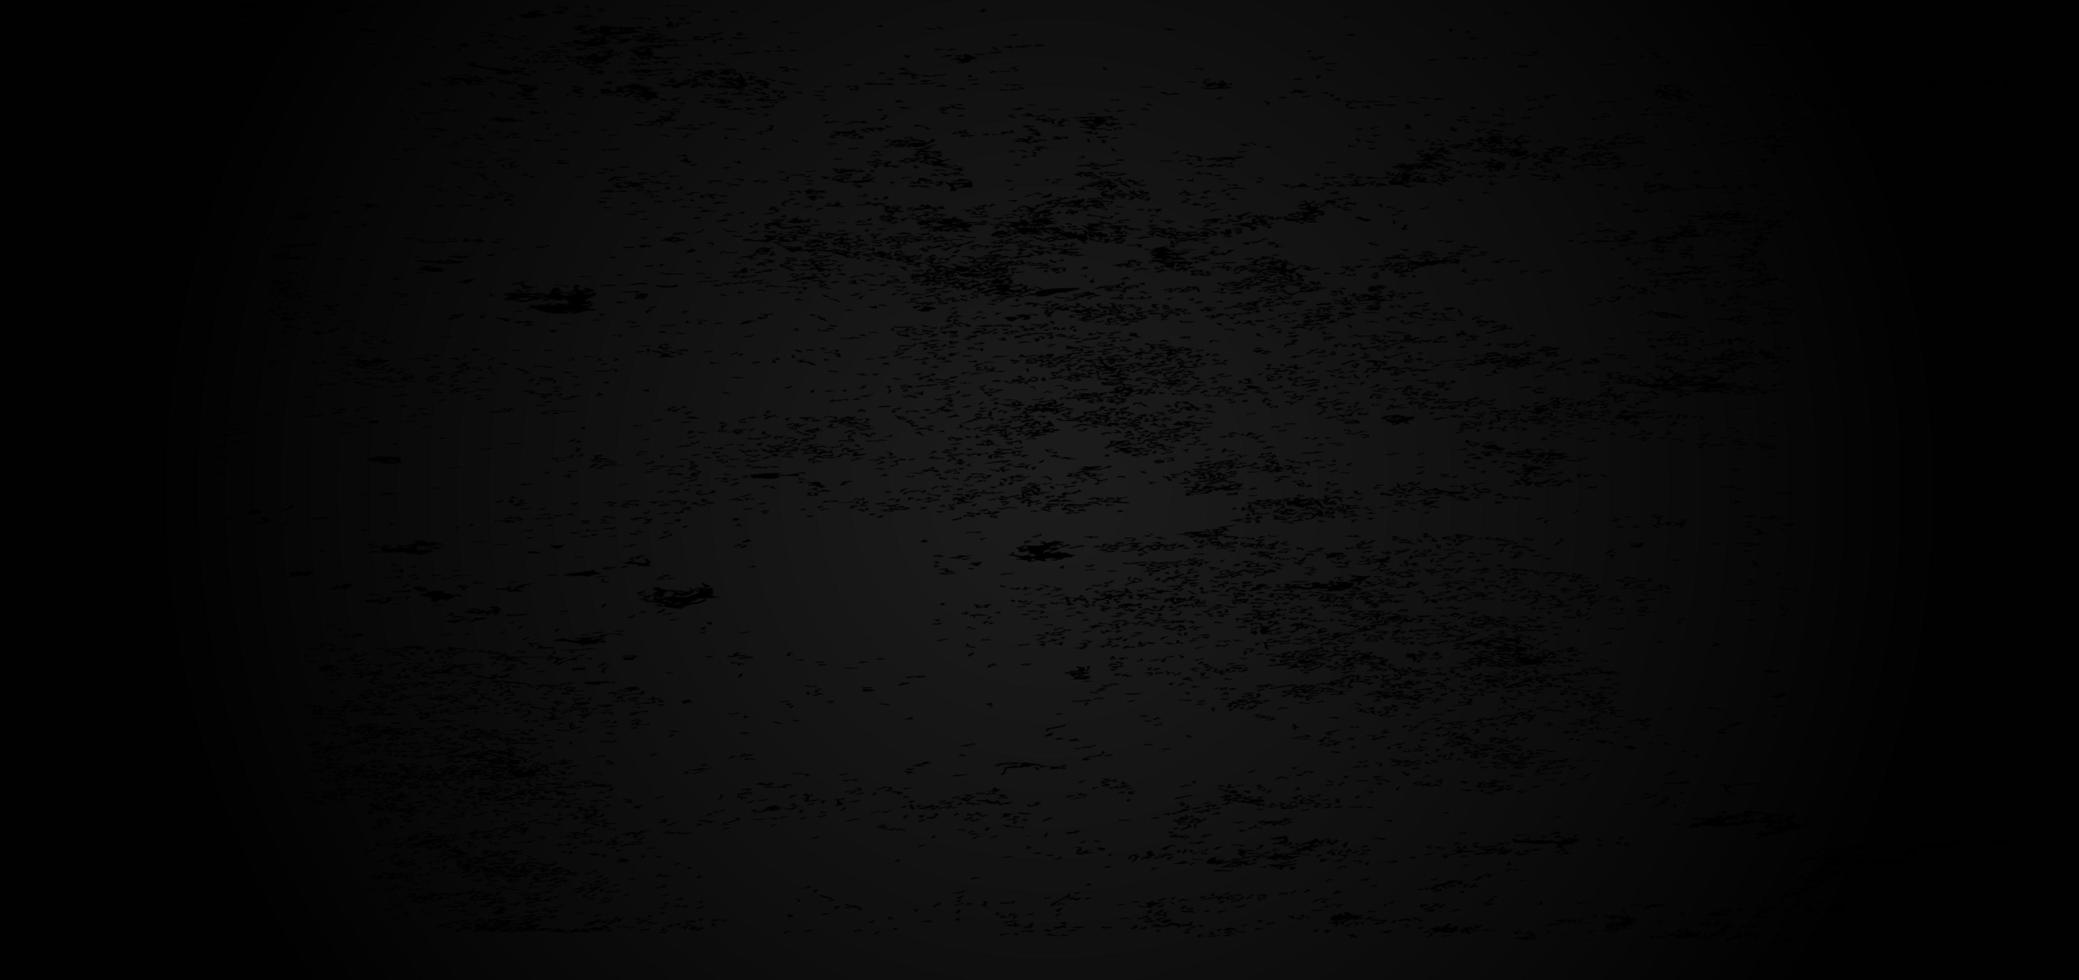 Black grunge texture. You can use for ad, poster, template, business presentation. vector